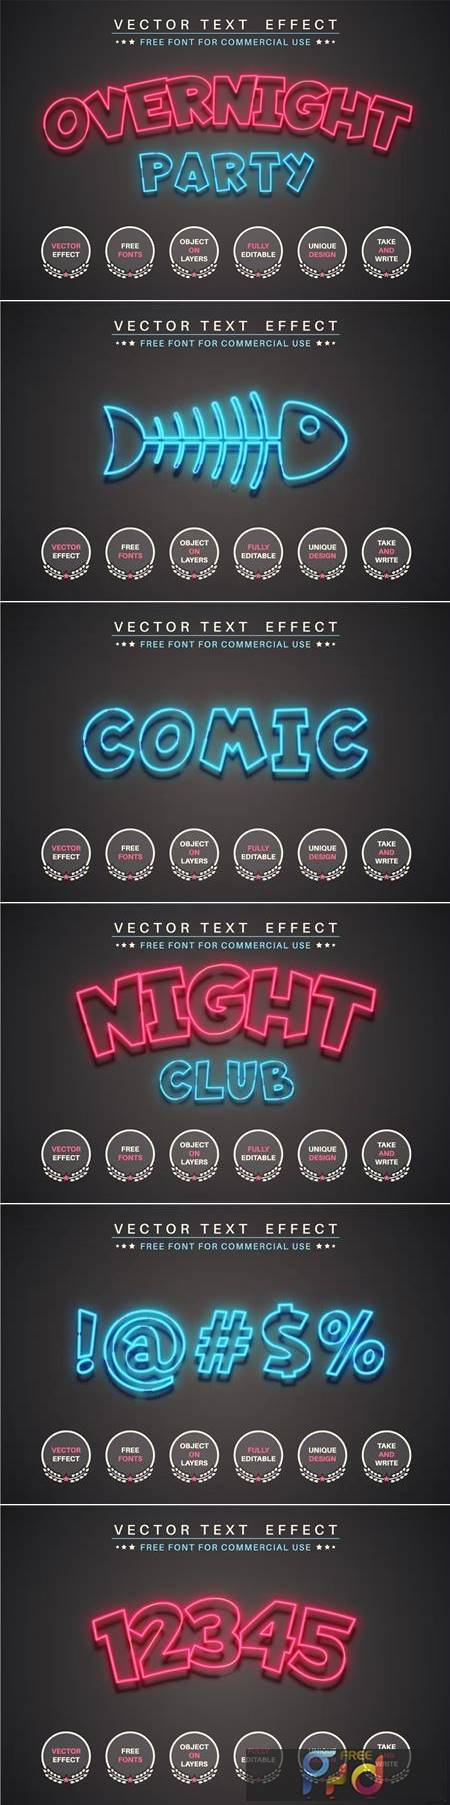 Night Party - Editable Text Effect, Font Style 95BQAG9 1